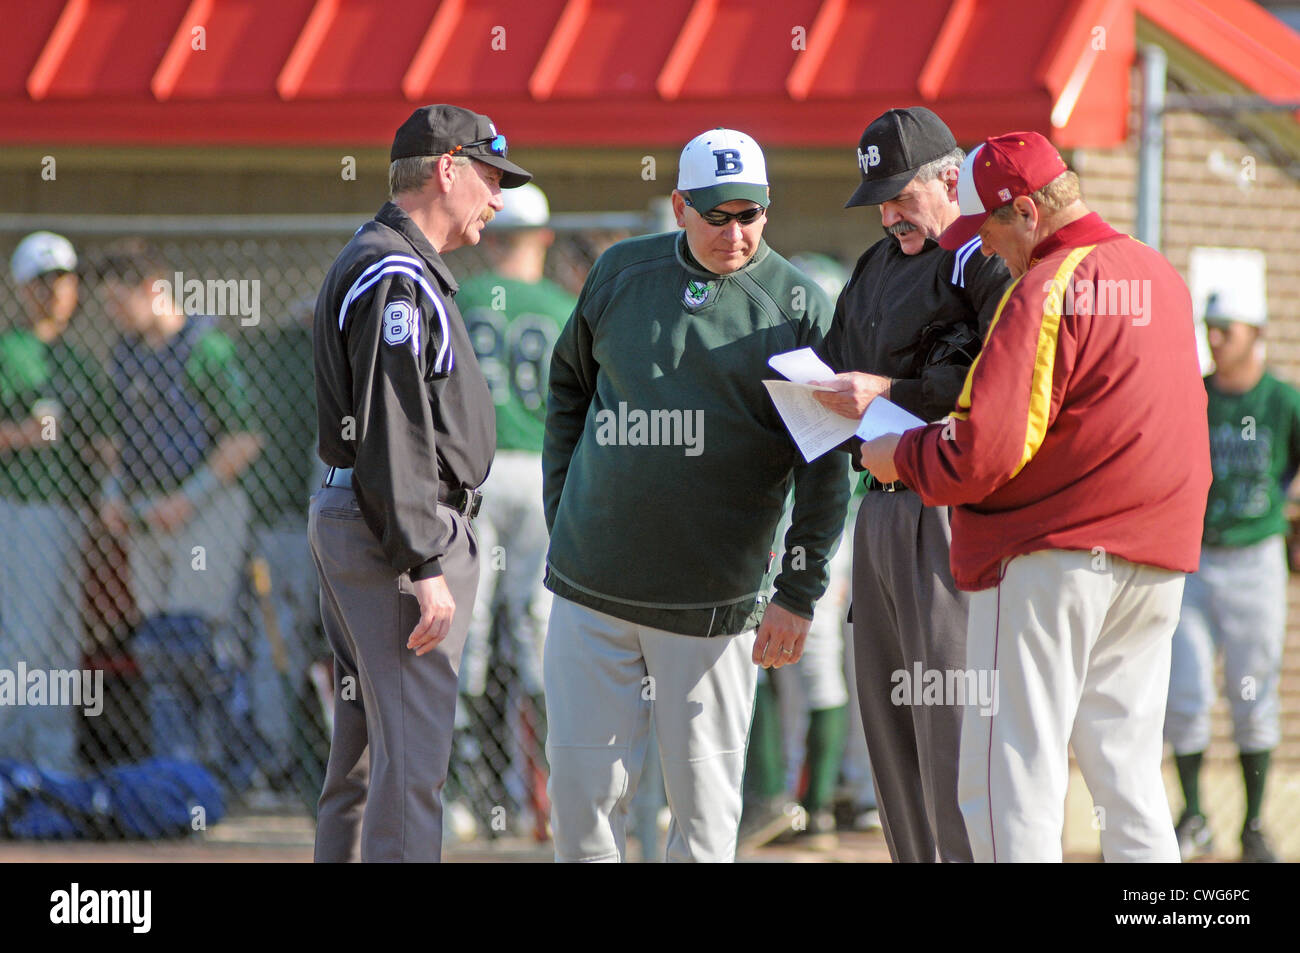 Baseball coaches and umpires exchange batting orders and go over ground rules prior to the start of a high school baseball game. USA. Stock Photo